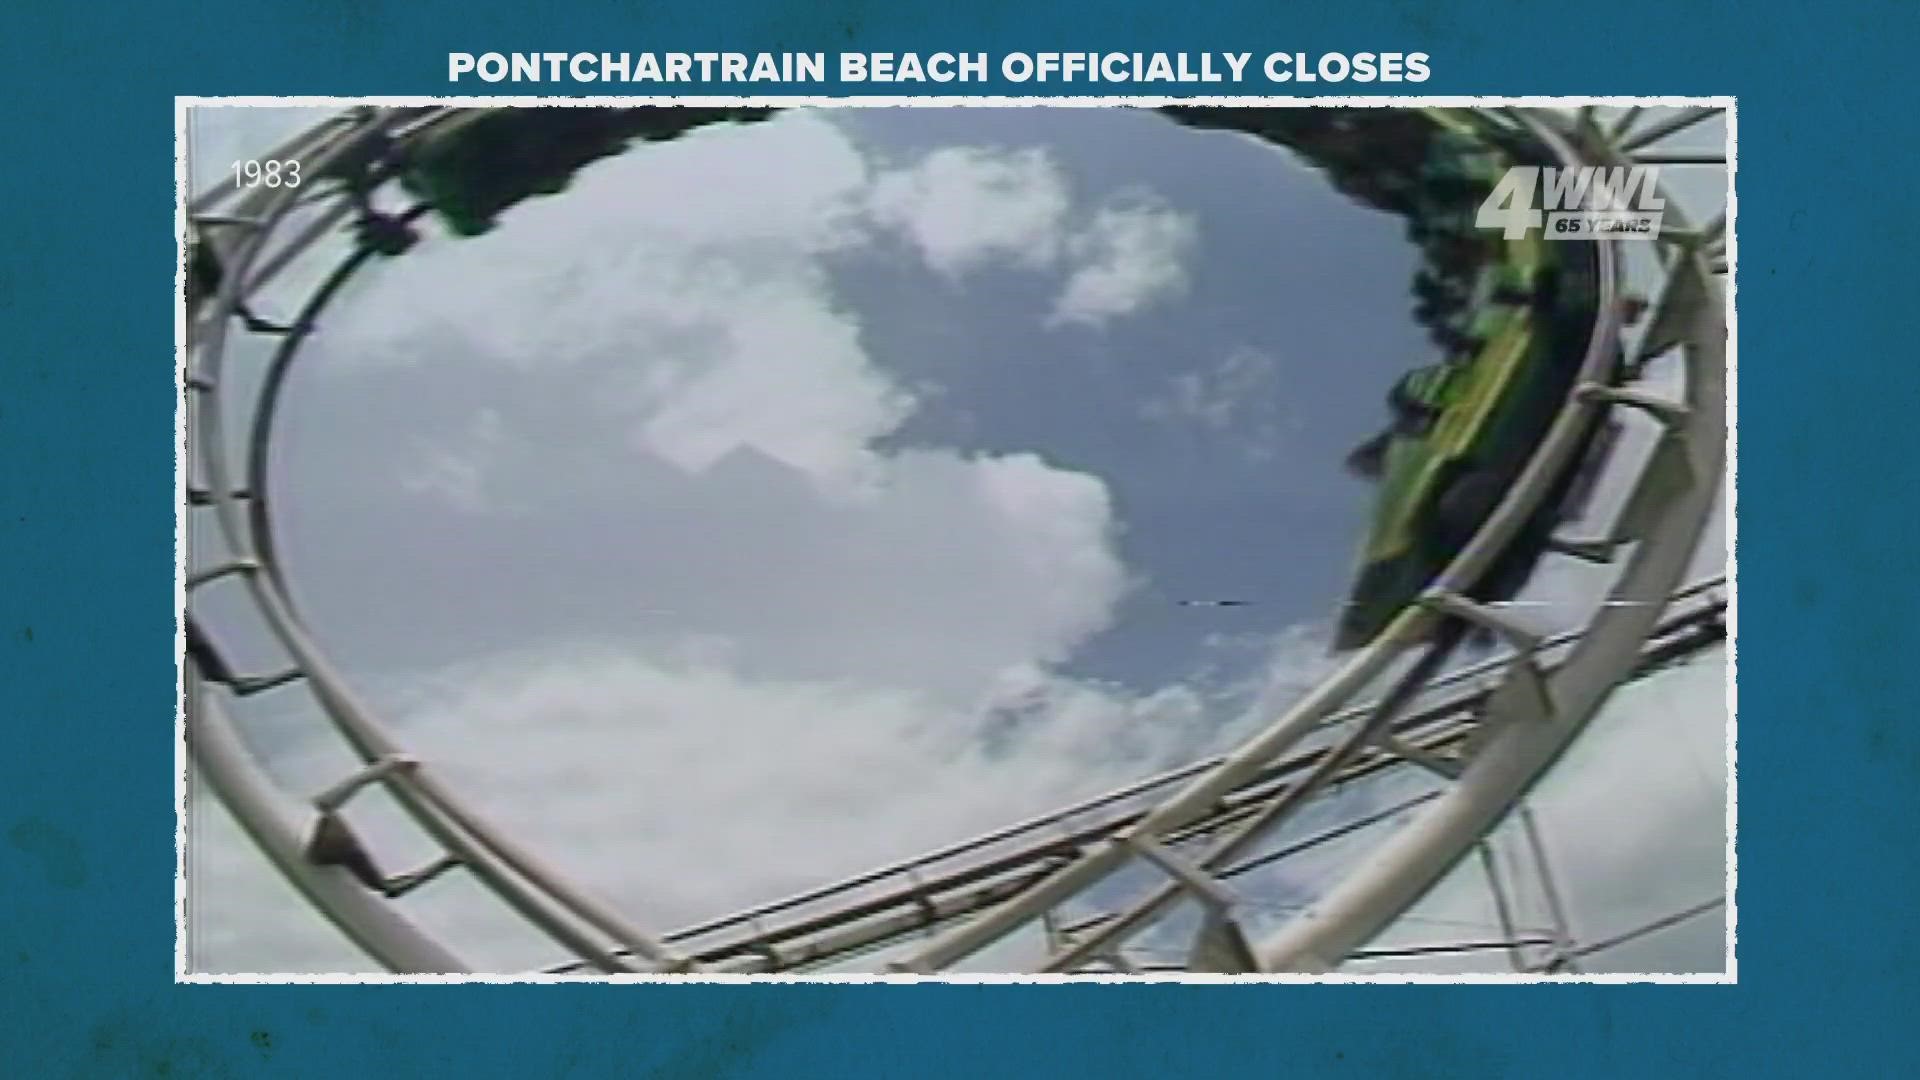 Mike Hoss has a look back at the amusement parks - Pontchartrain and Lincoln Beach.